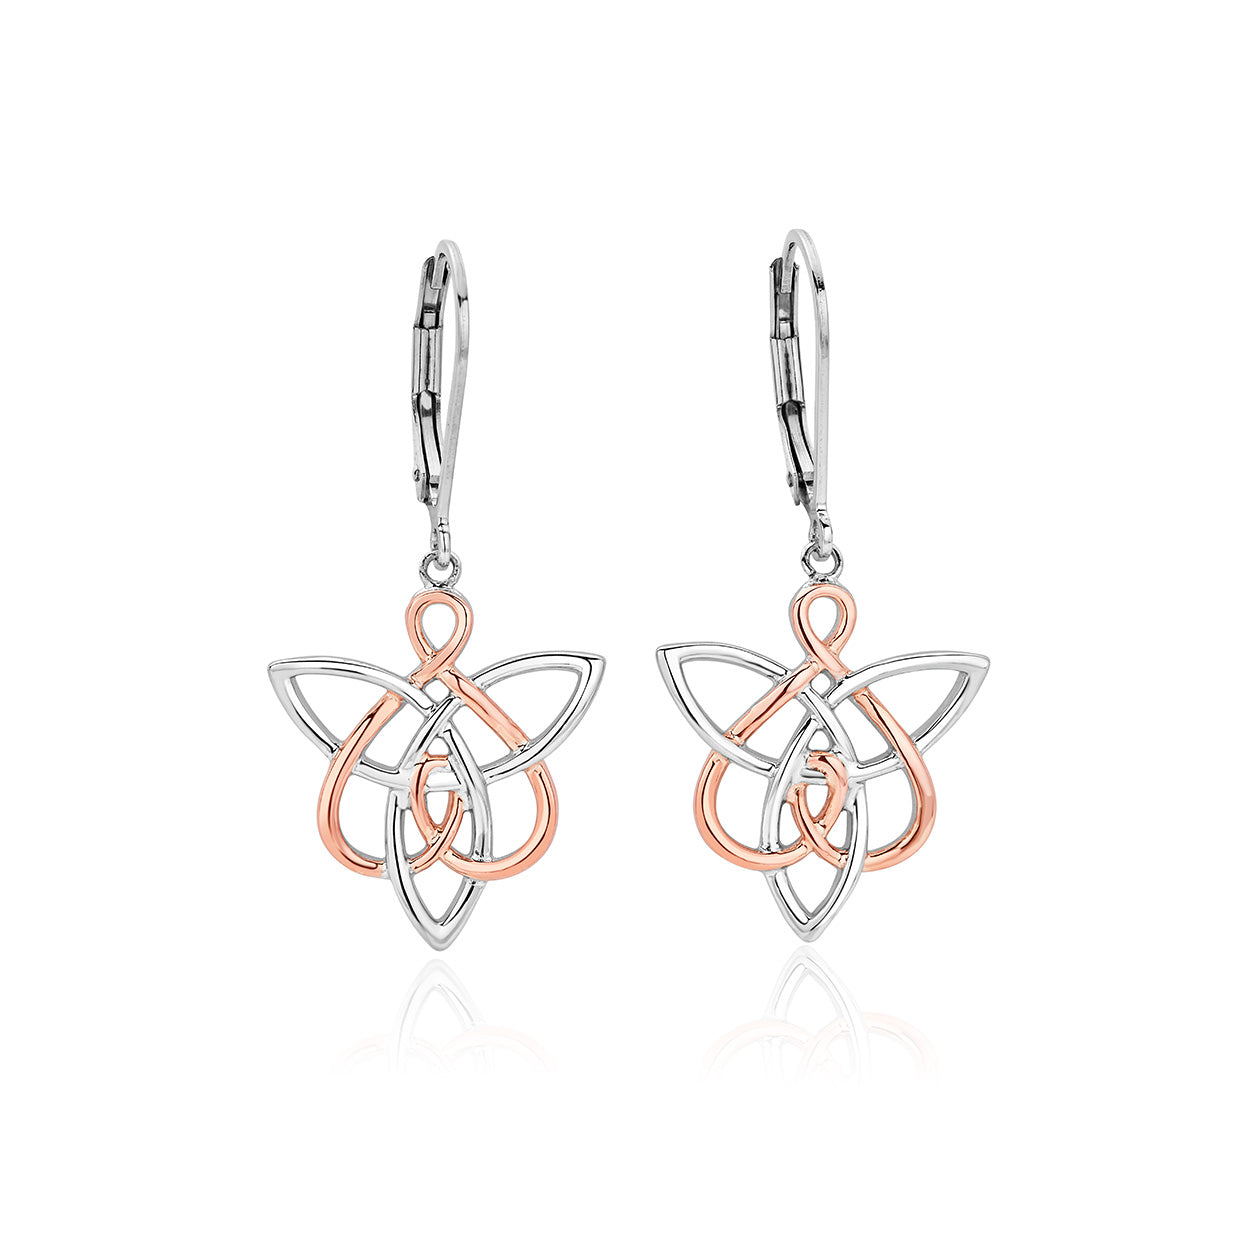 Clogau Fairies of the Mine White Topaz Sterling Silver Drop Earrings